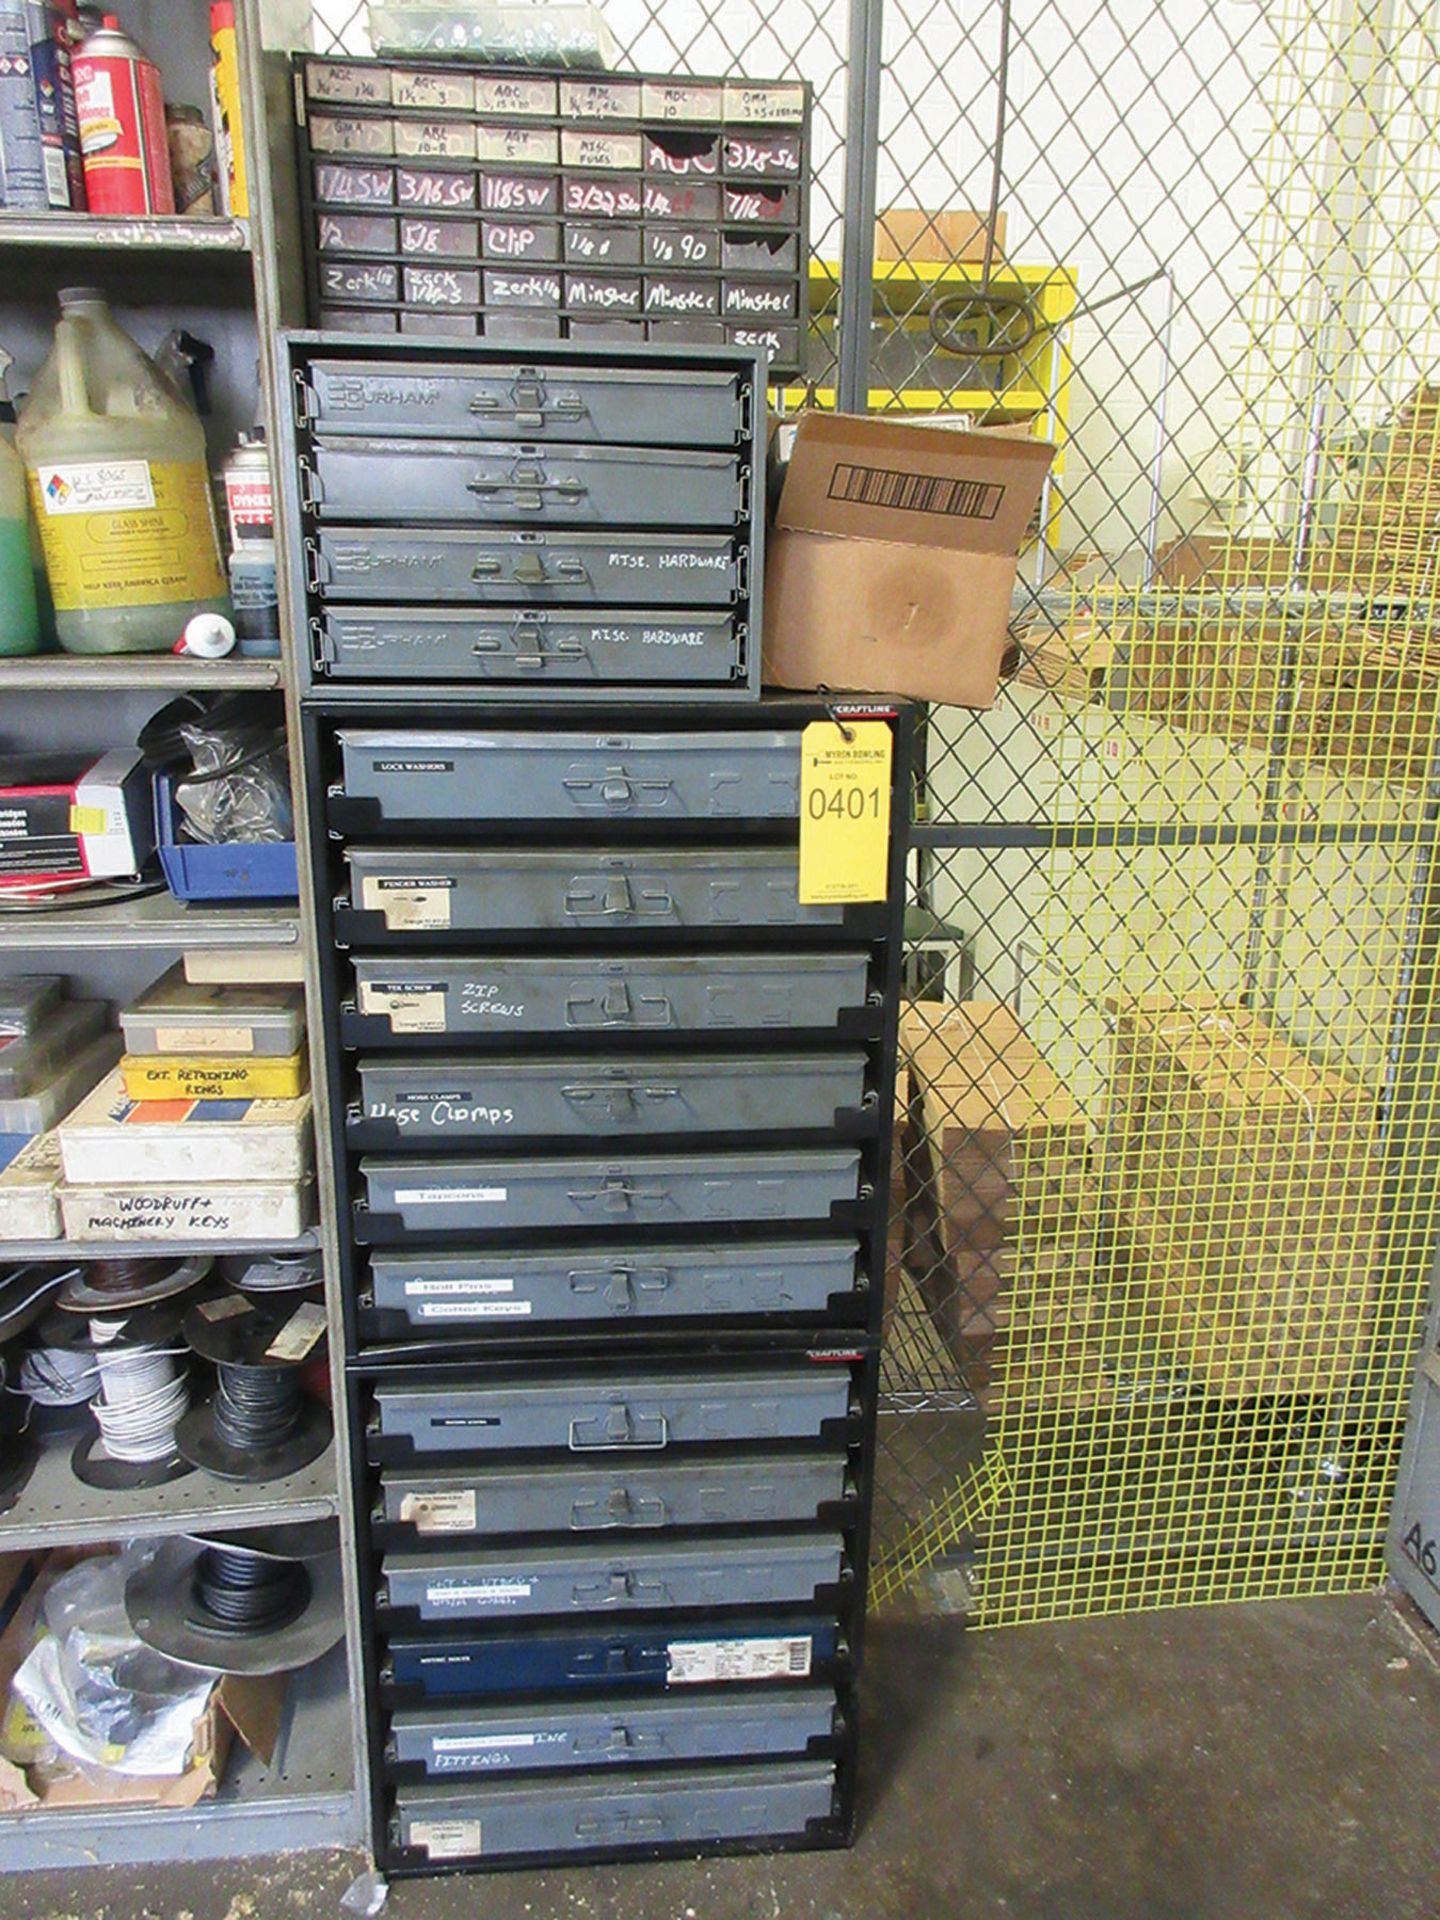 CRAFTLINE PARTS CABINETS AND TOP CABINETS WITH CONTENTS; WASHERS, HOSE CLAMPS, AND GREASE ZERKS